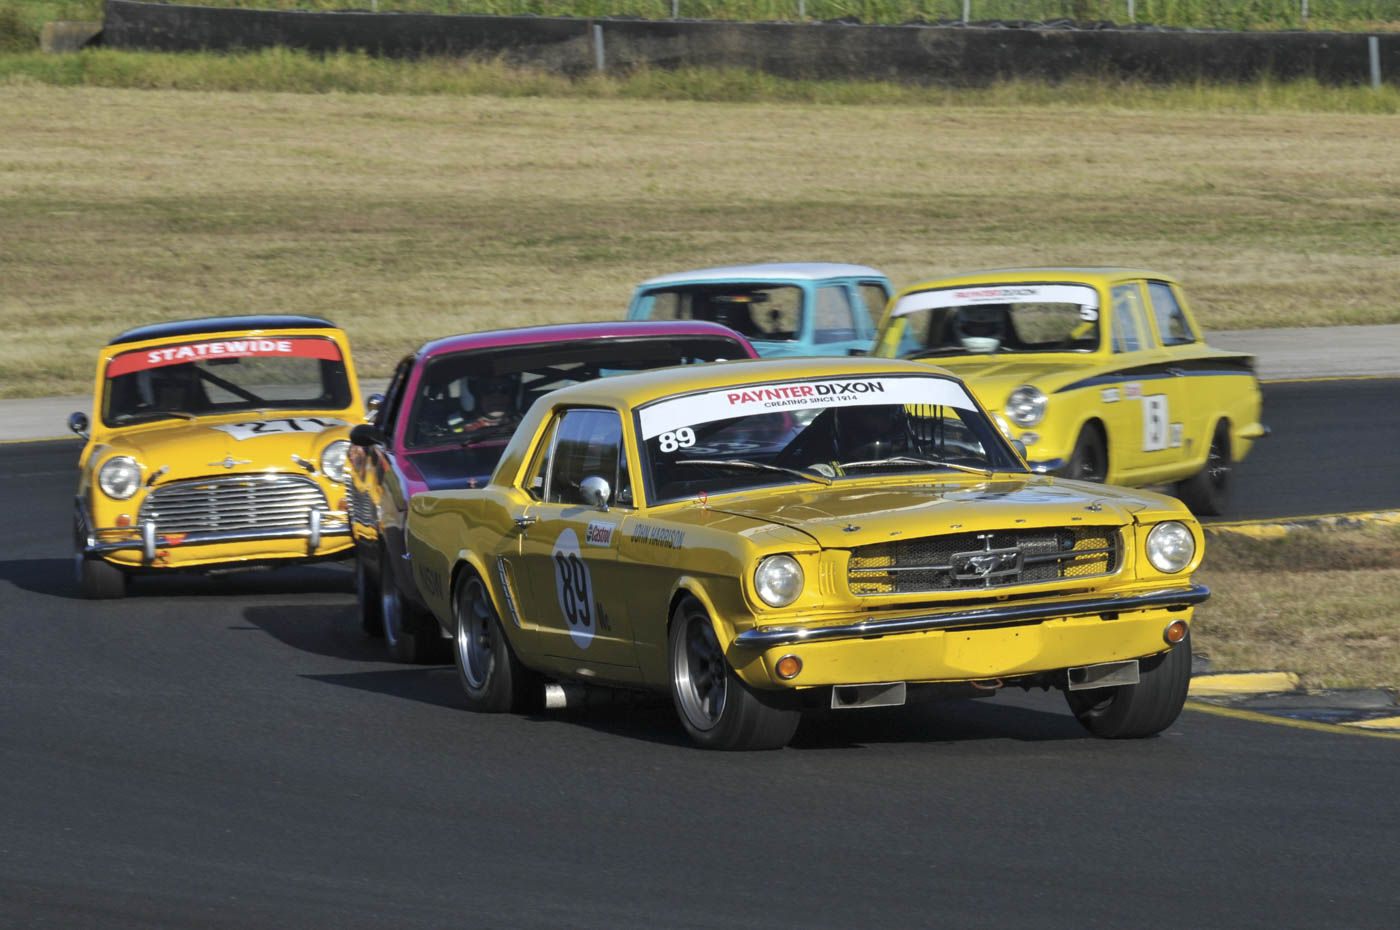 Close touring car racing at the HSRCA Sydney Classic event